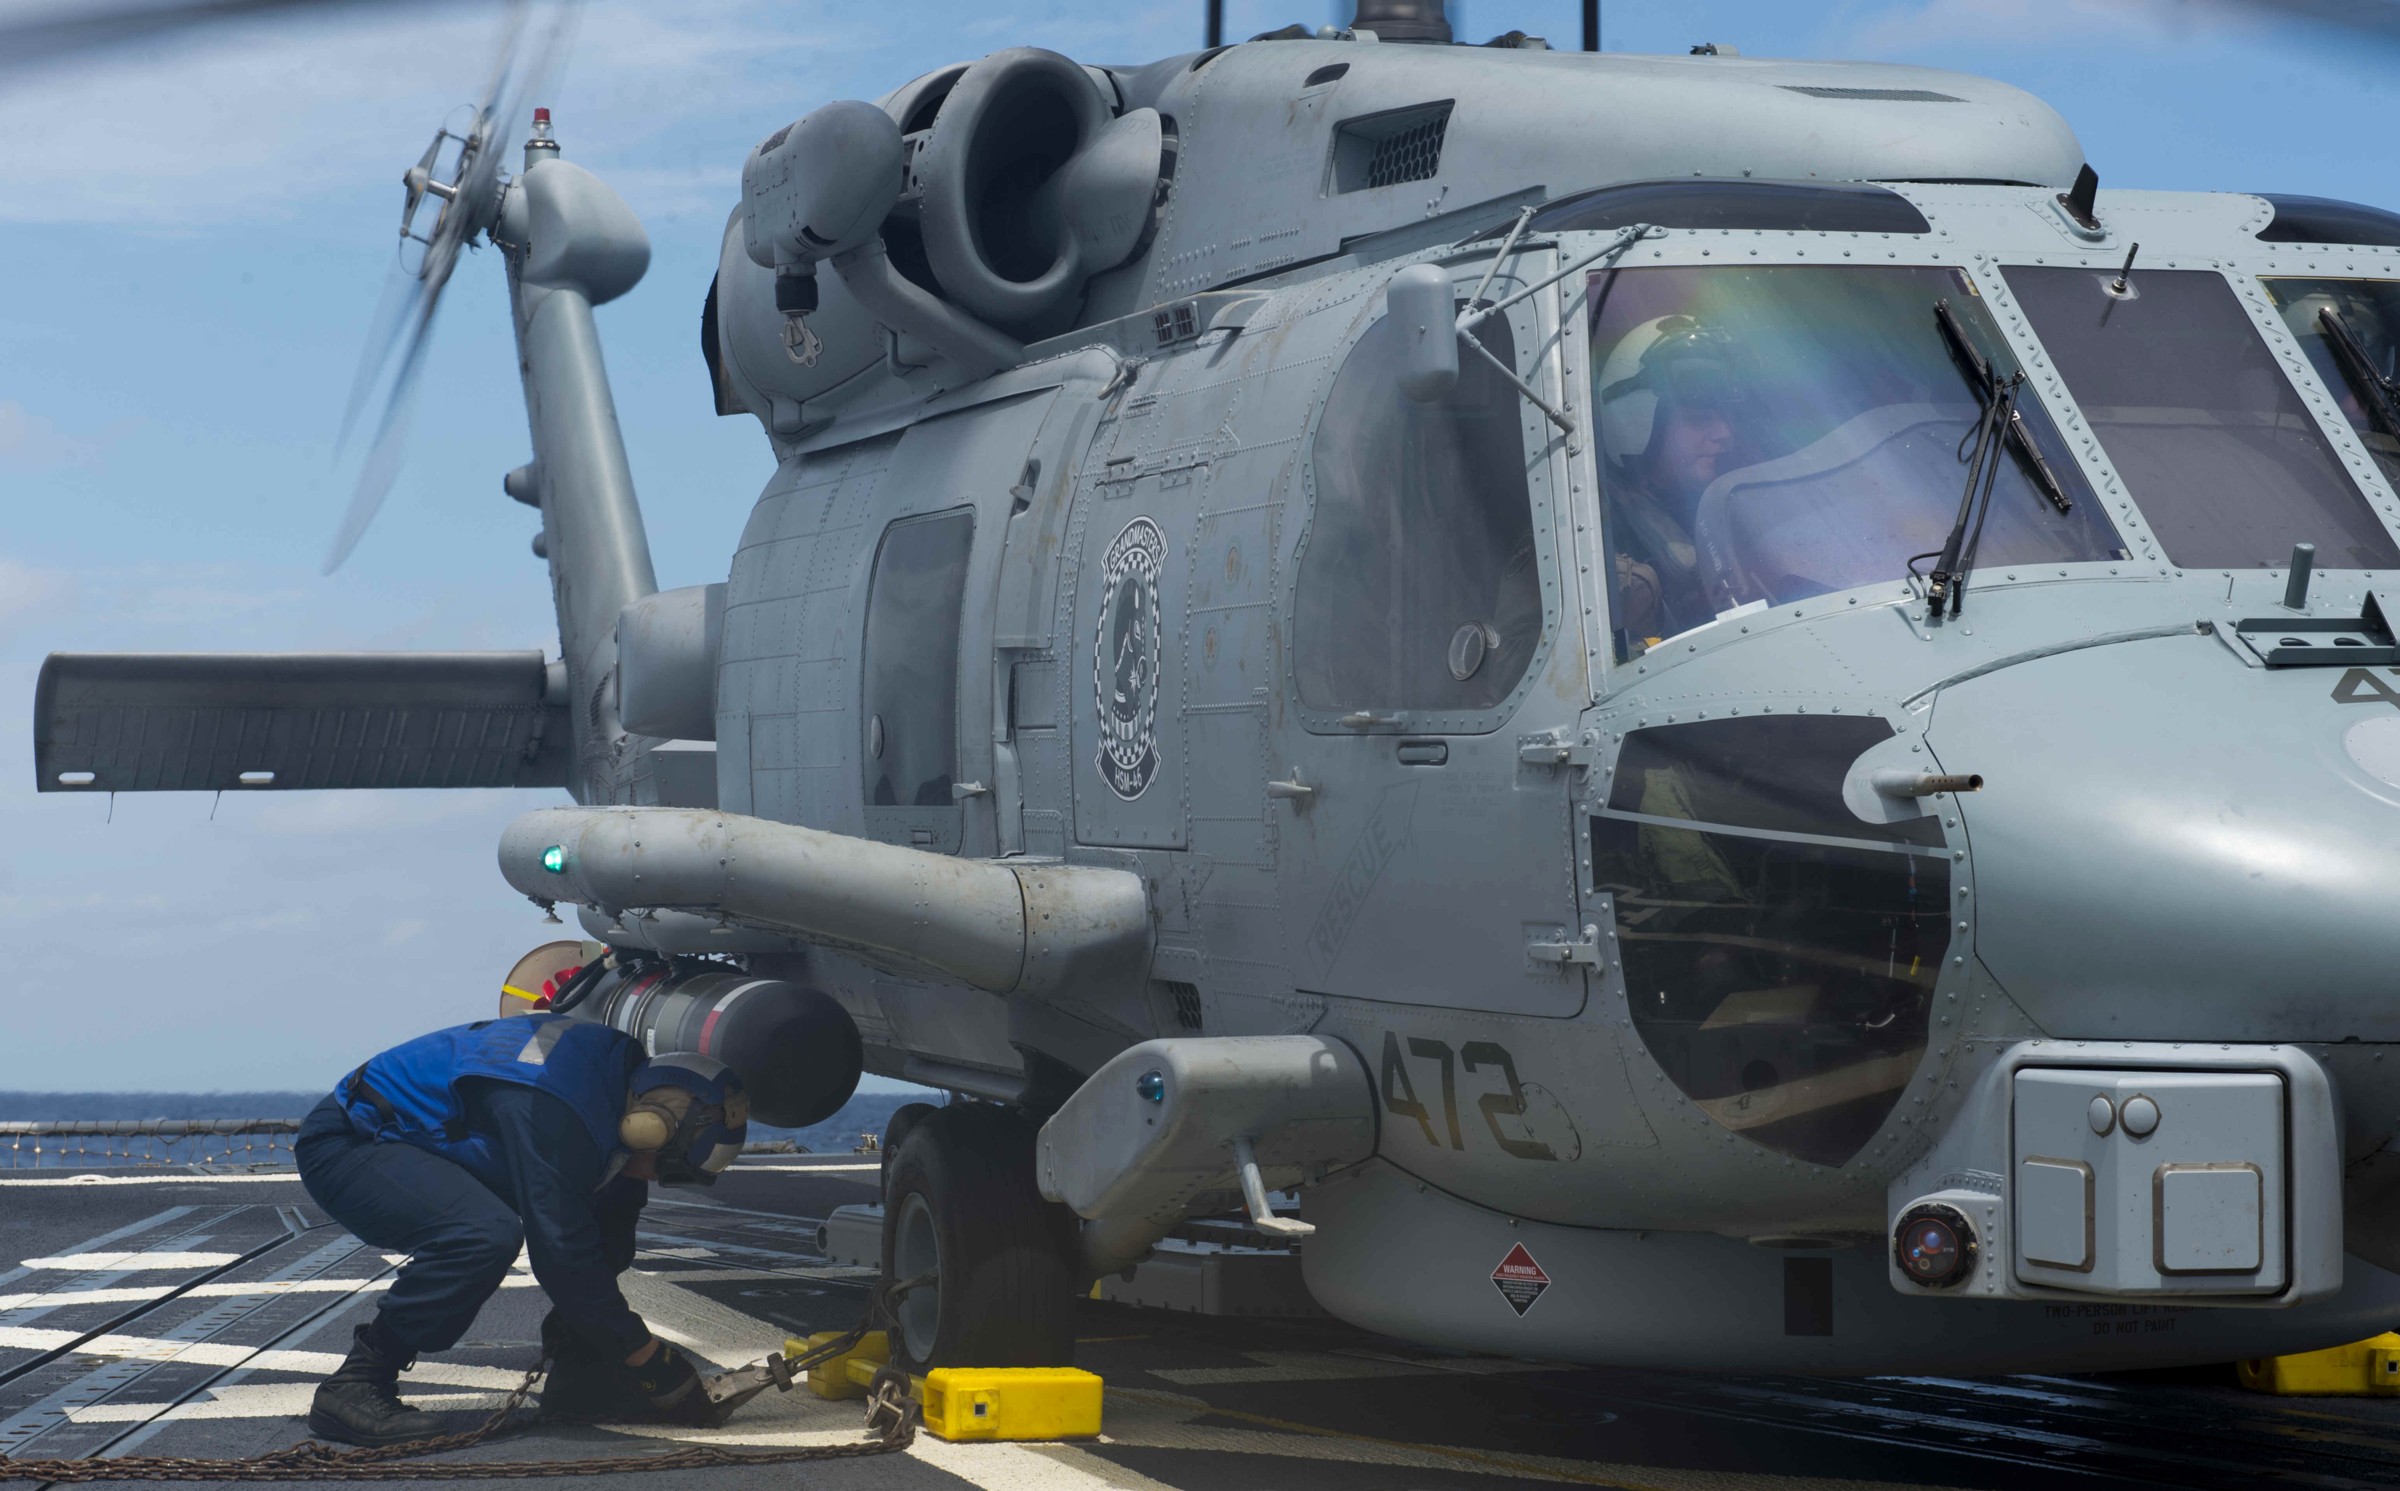 hsm-46 grandmasters helicopter maritime strike squadron mh-60r seahawk 2014 54